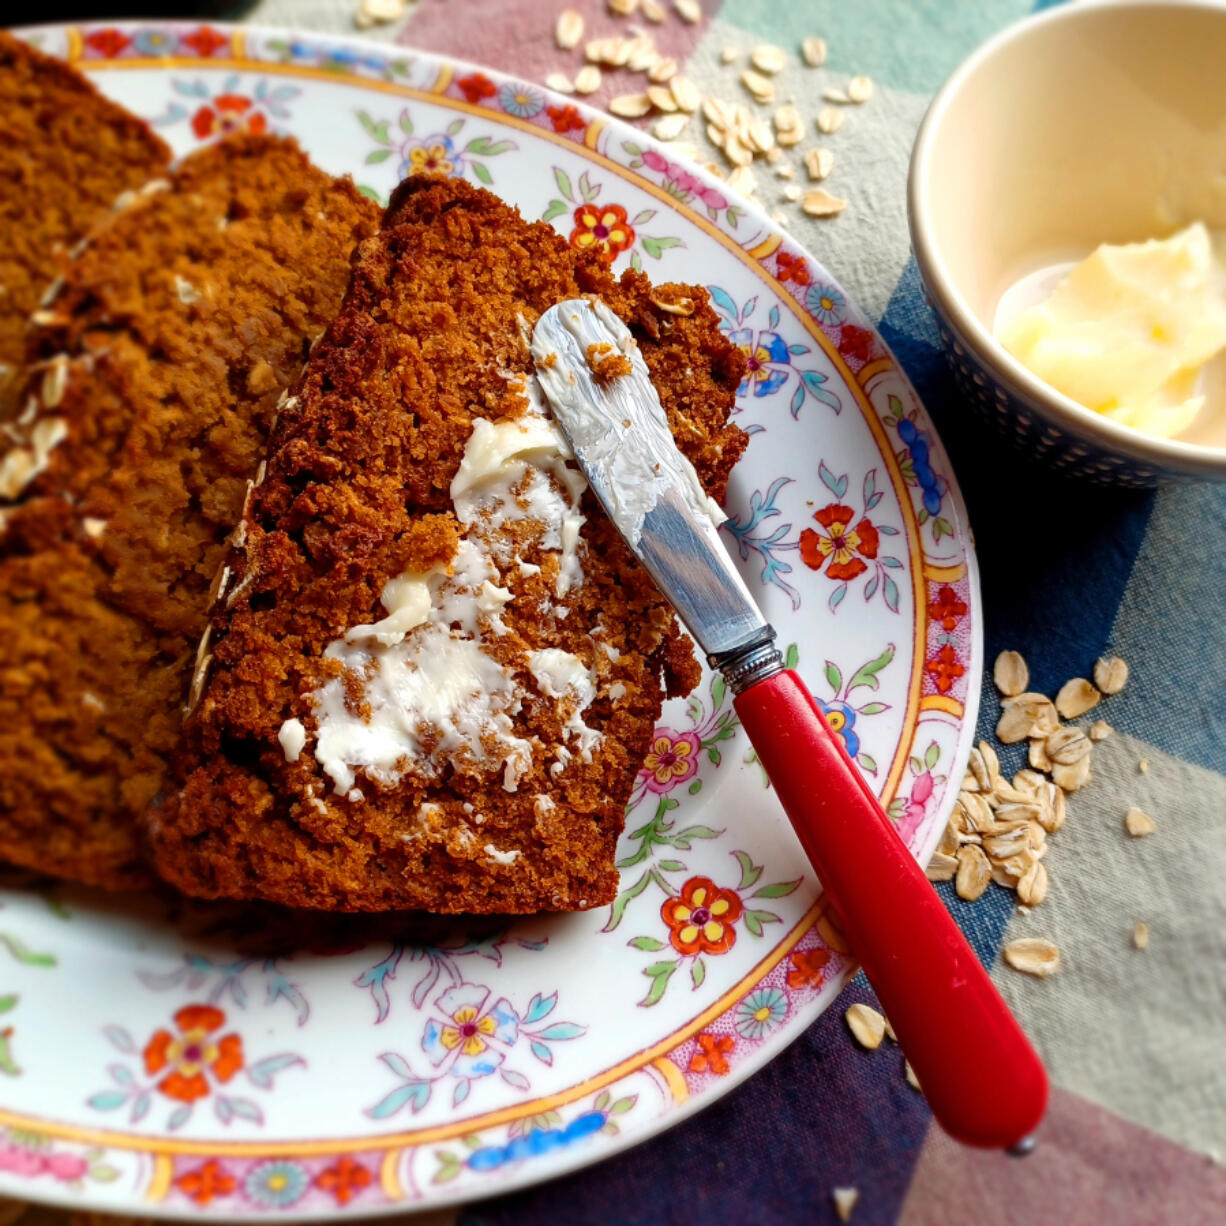 Slather on the butter and enjoy this semi-sweet oatmeal stout bread with a cup of tea or coffee.